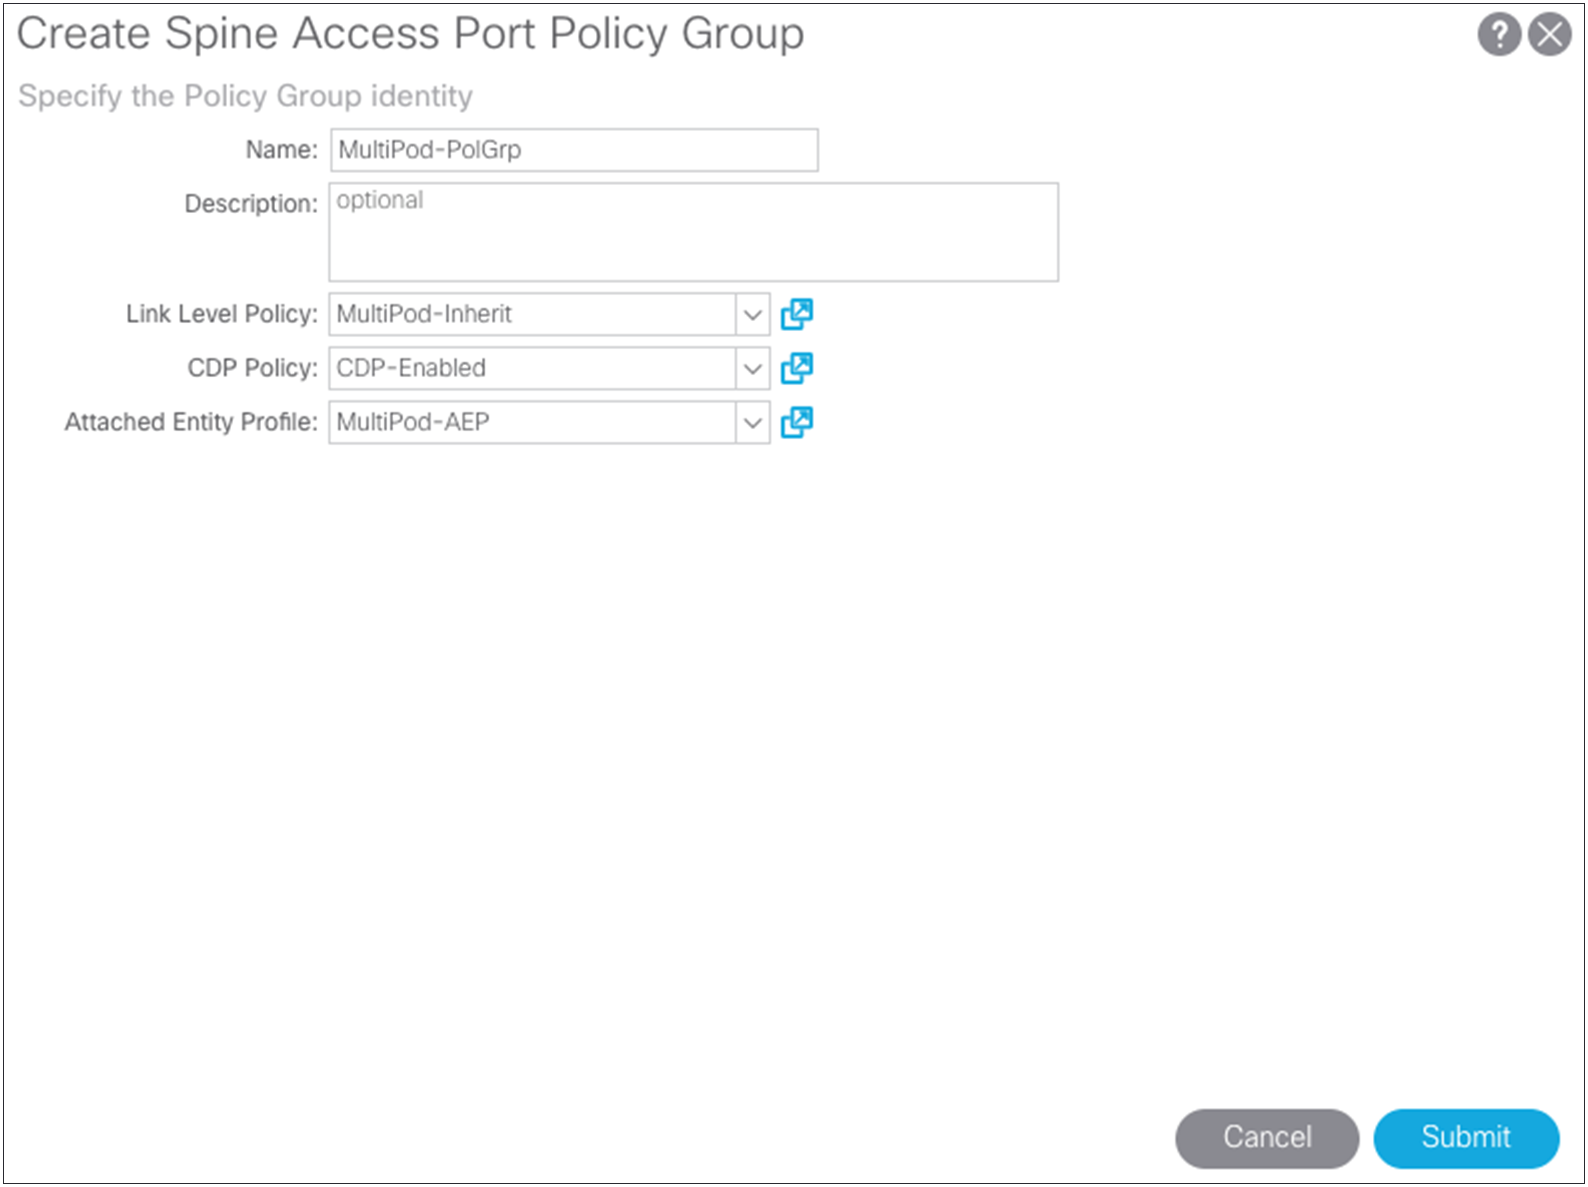 Create Spine Access Port Policy Group